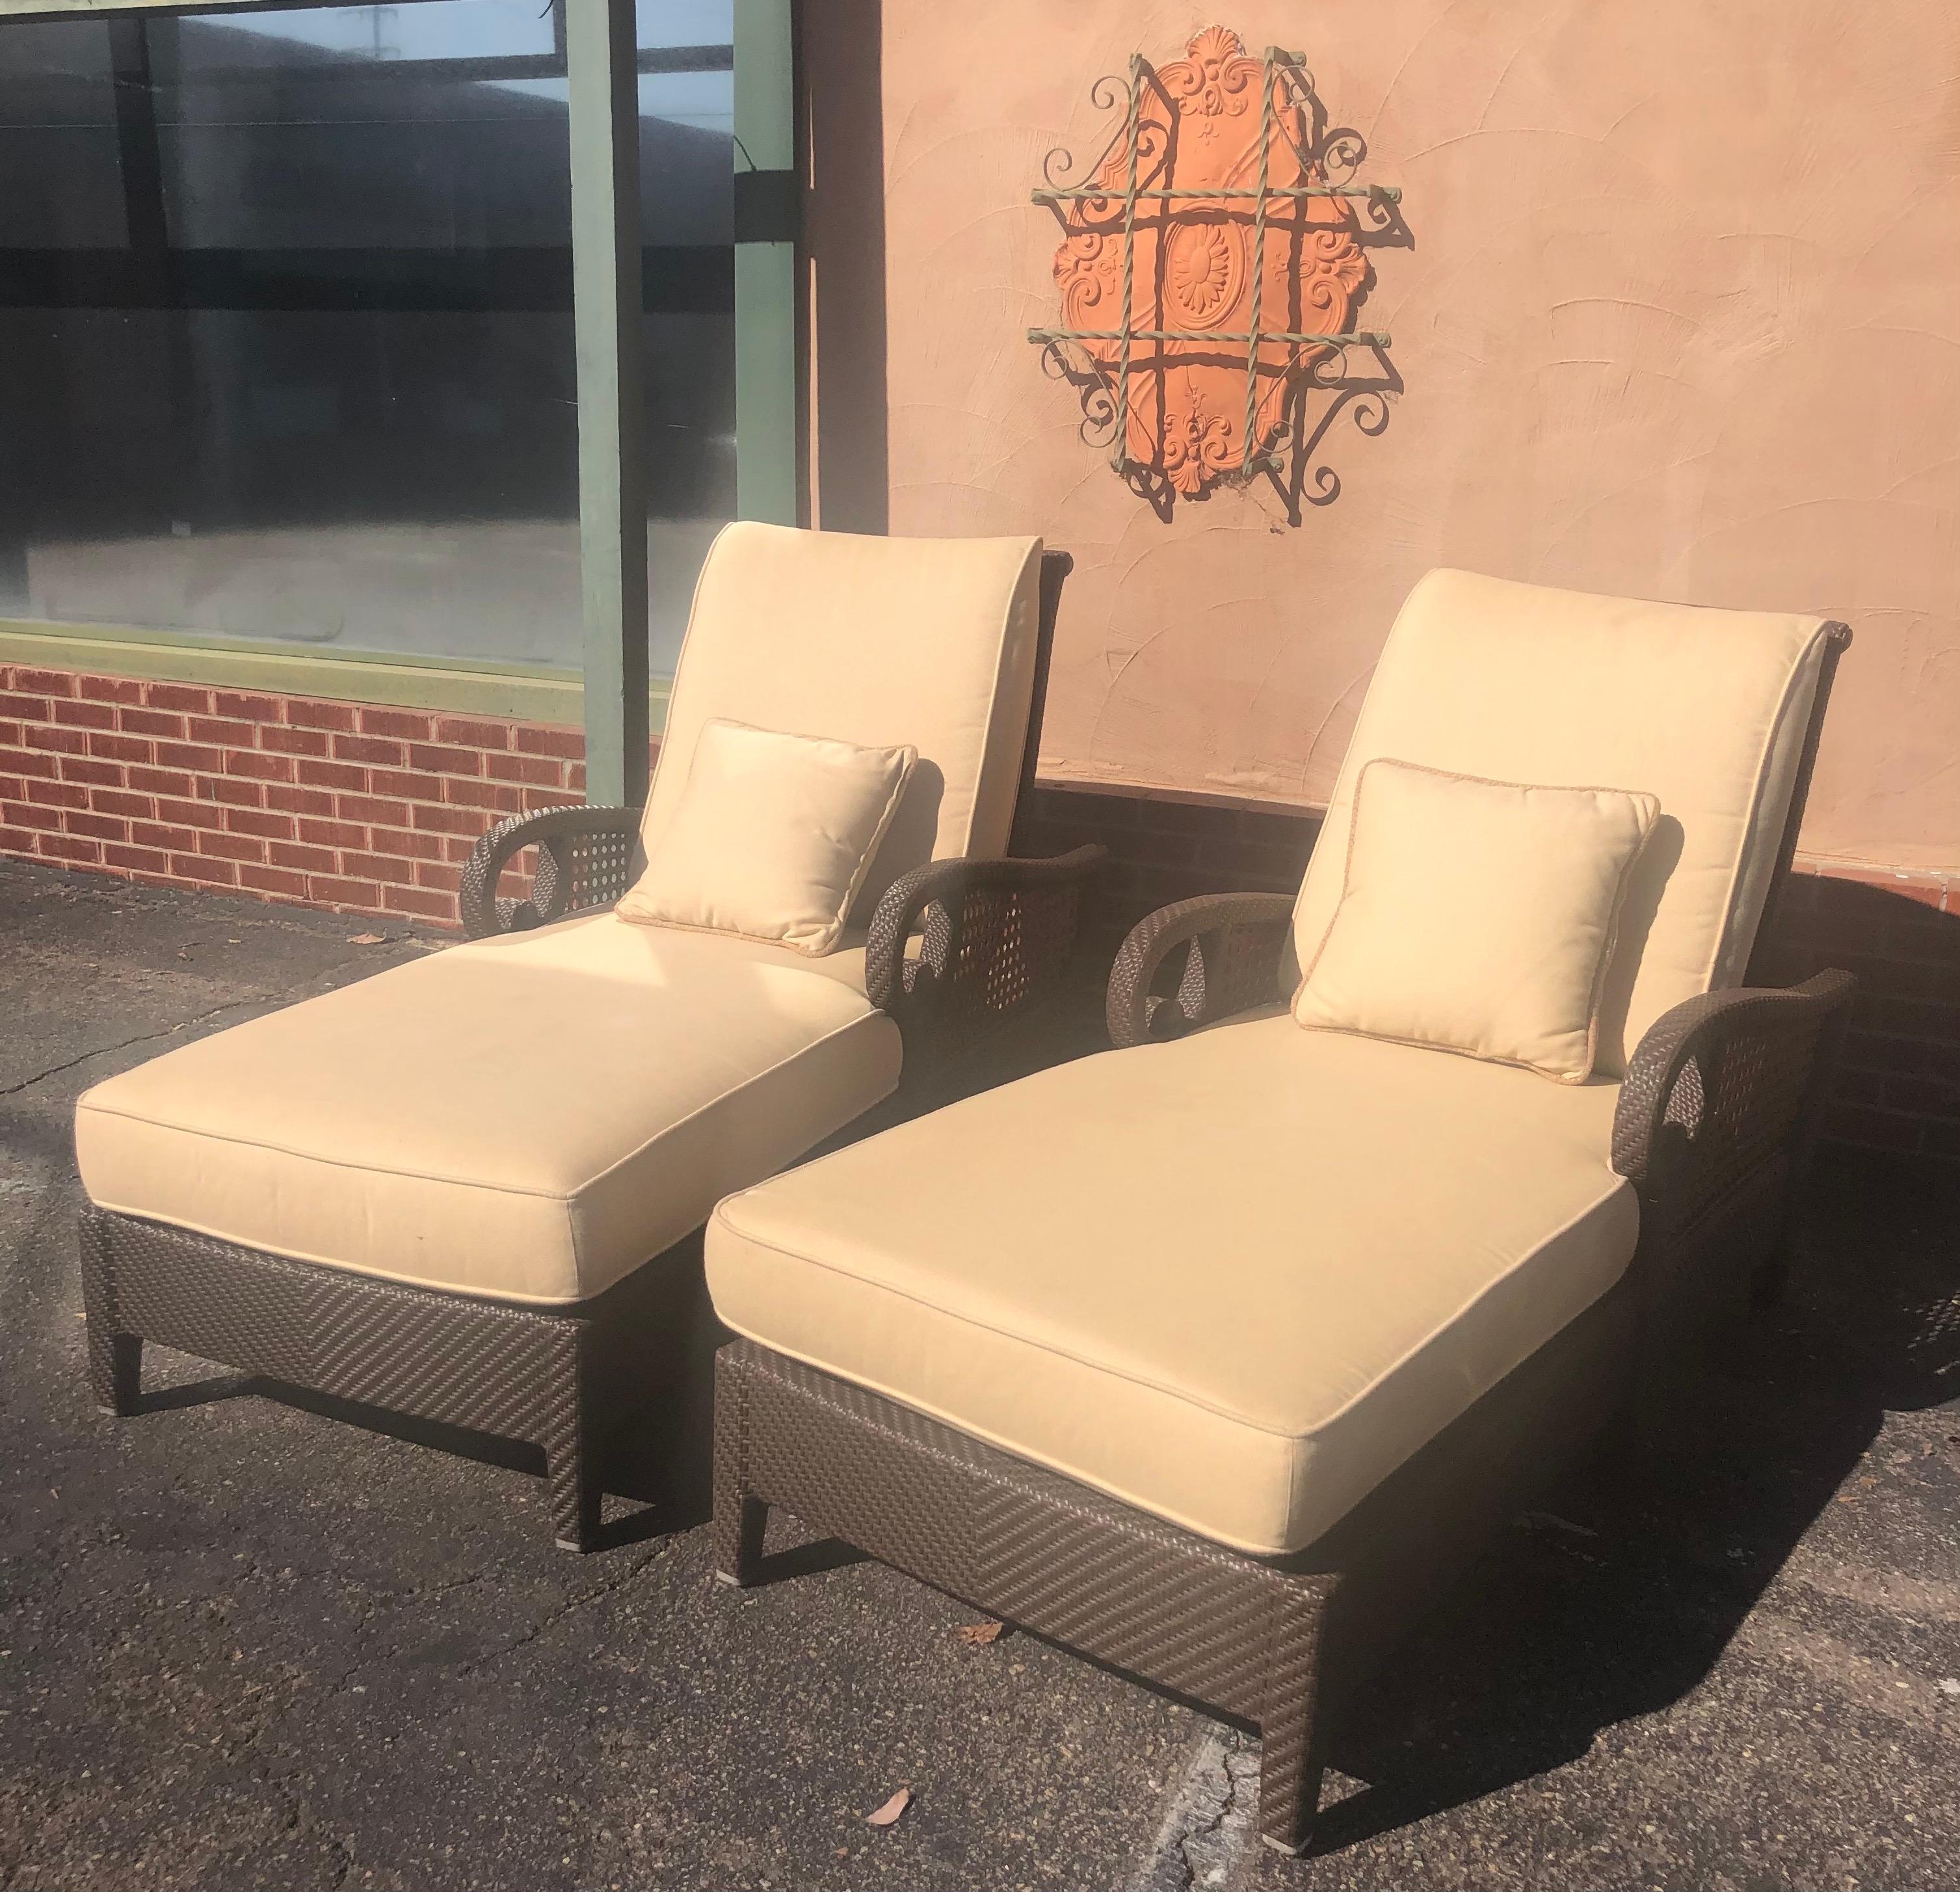 Gorgeous pair of outdoor articulating chaise lounges from the 